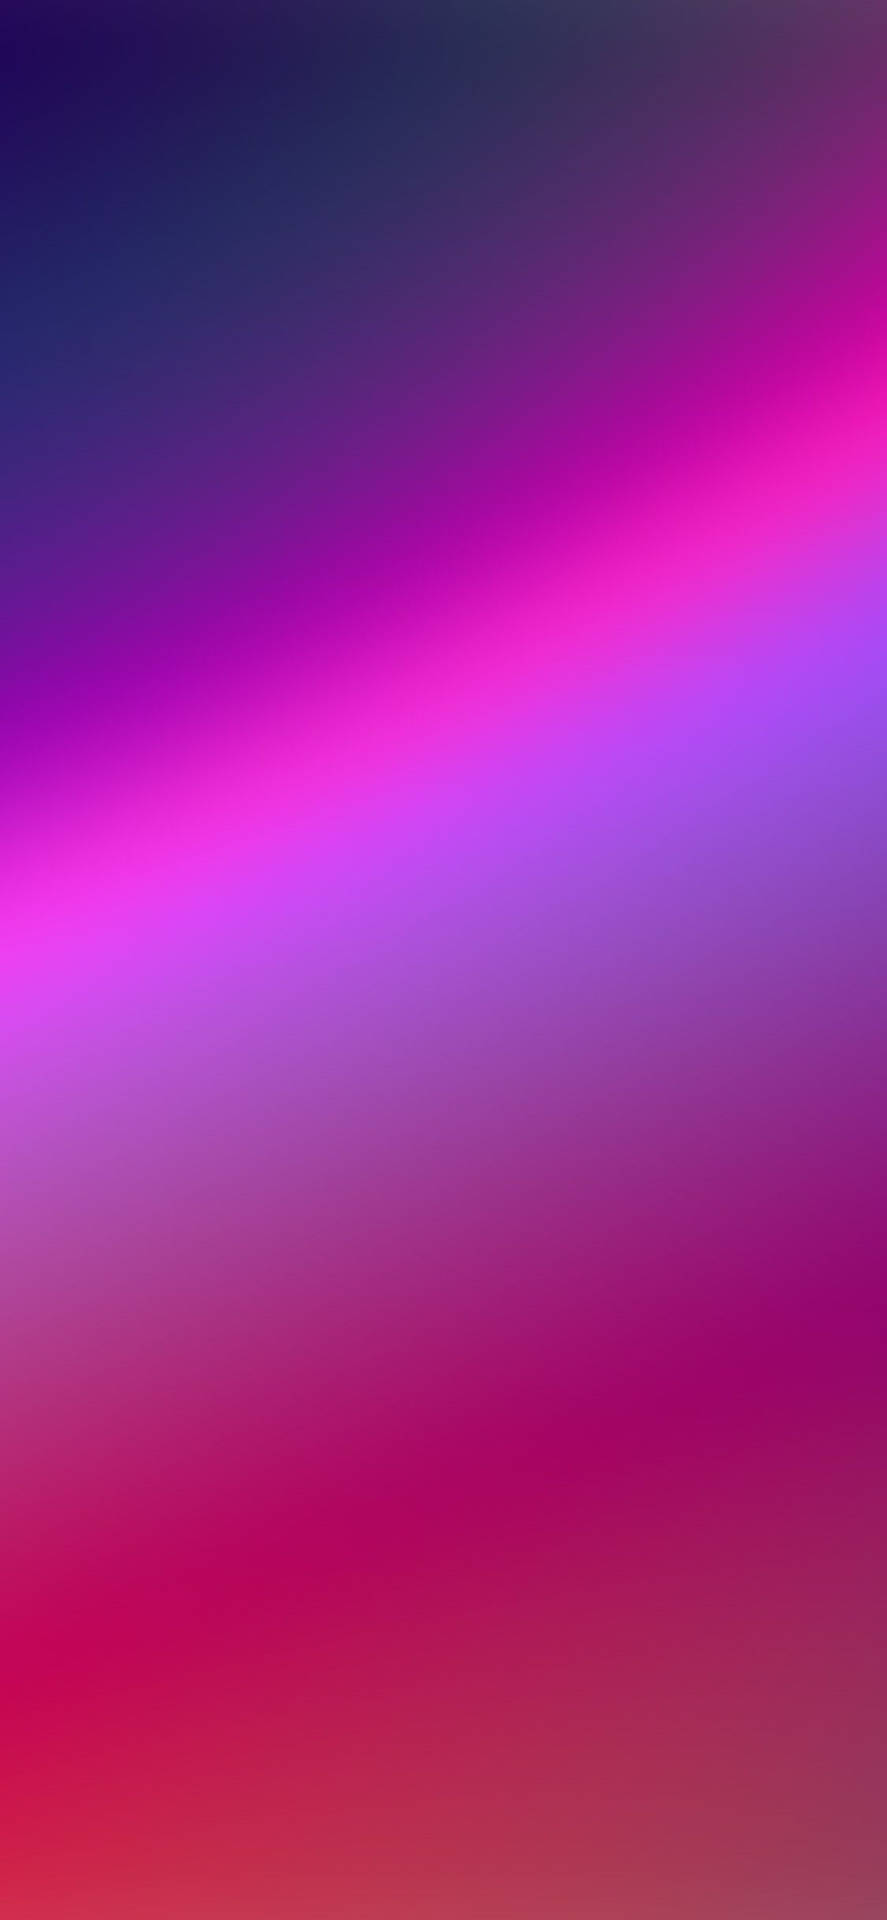 Neon Pink Gradient For Phone Picture